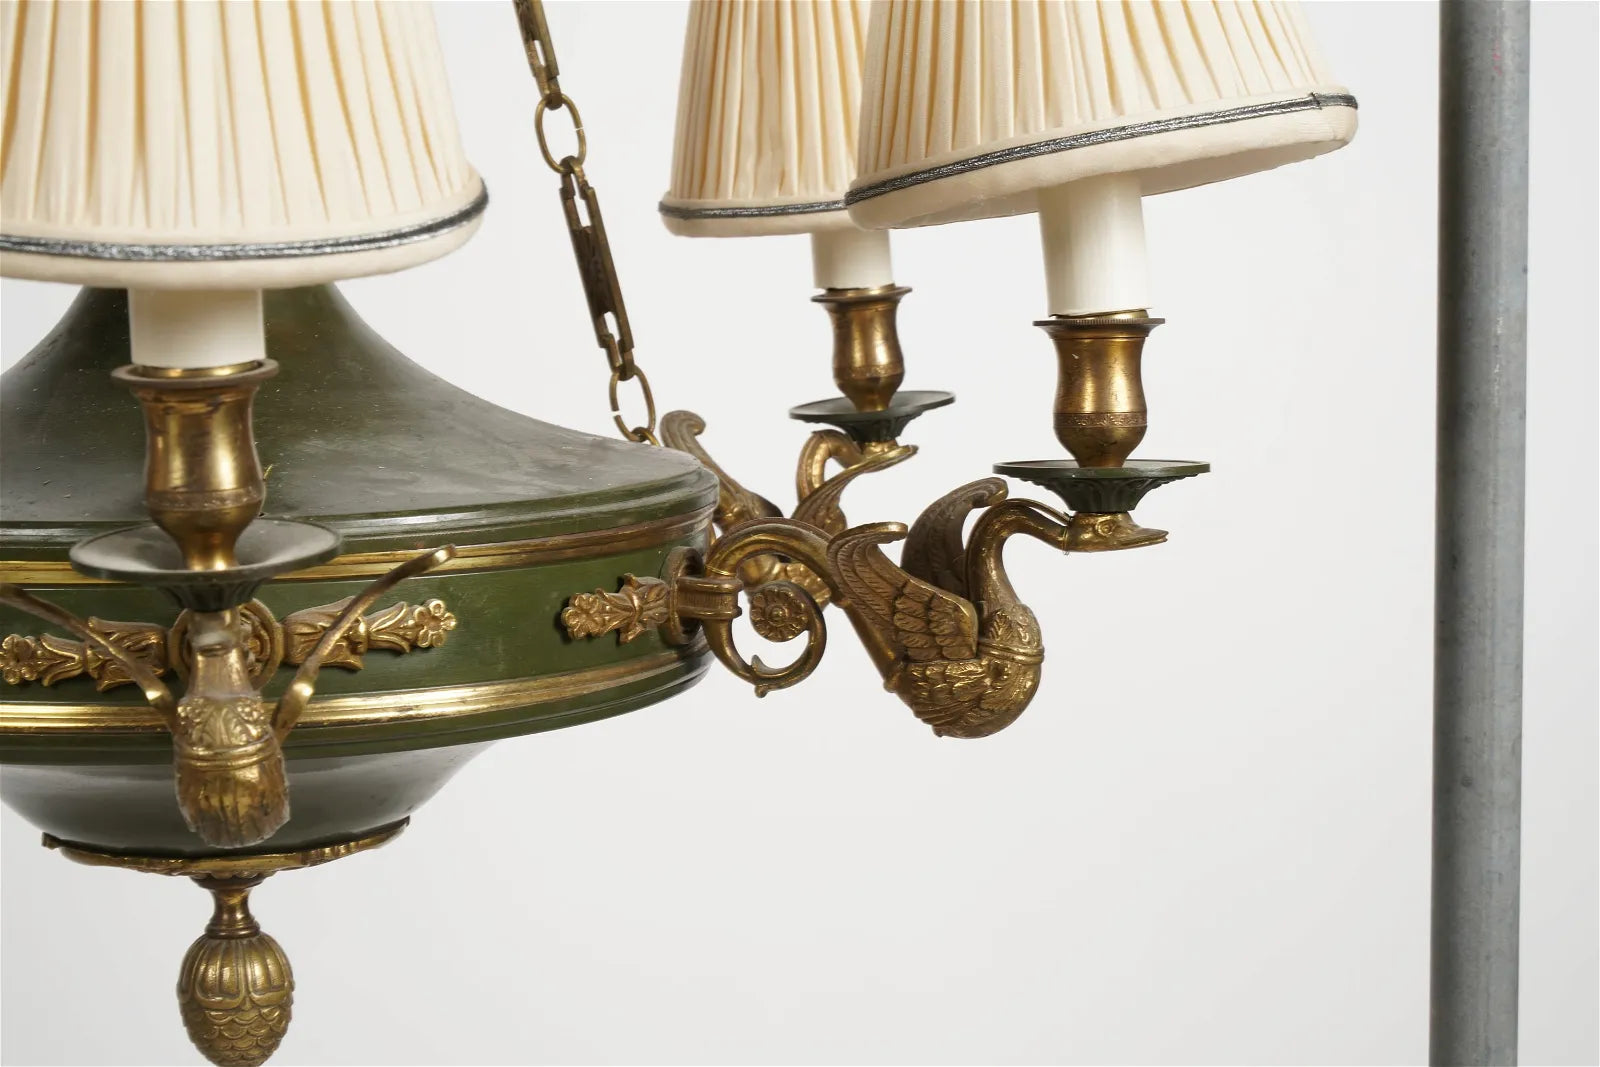 AL1-070: Early 20th Century French Empire Style Gilt Bronze & Patinated Metal 6 Light Chandelier